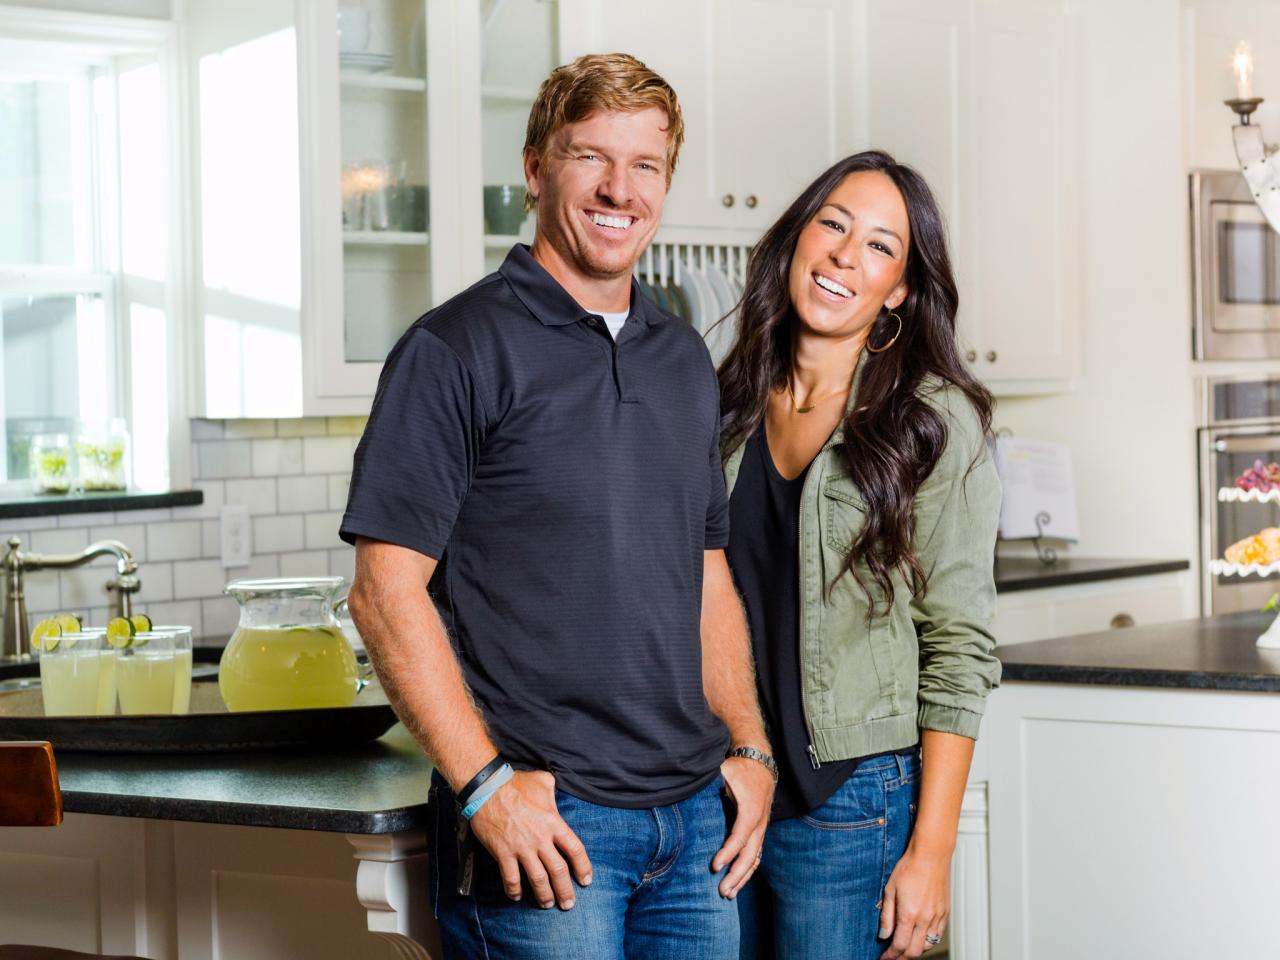 Kitchen Makeover Ideas From Fixer Upper, Fixer Upper: Welcome Home With  Chip and Joanna Gaines